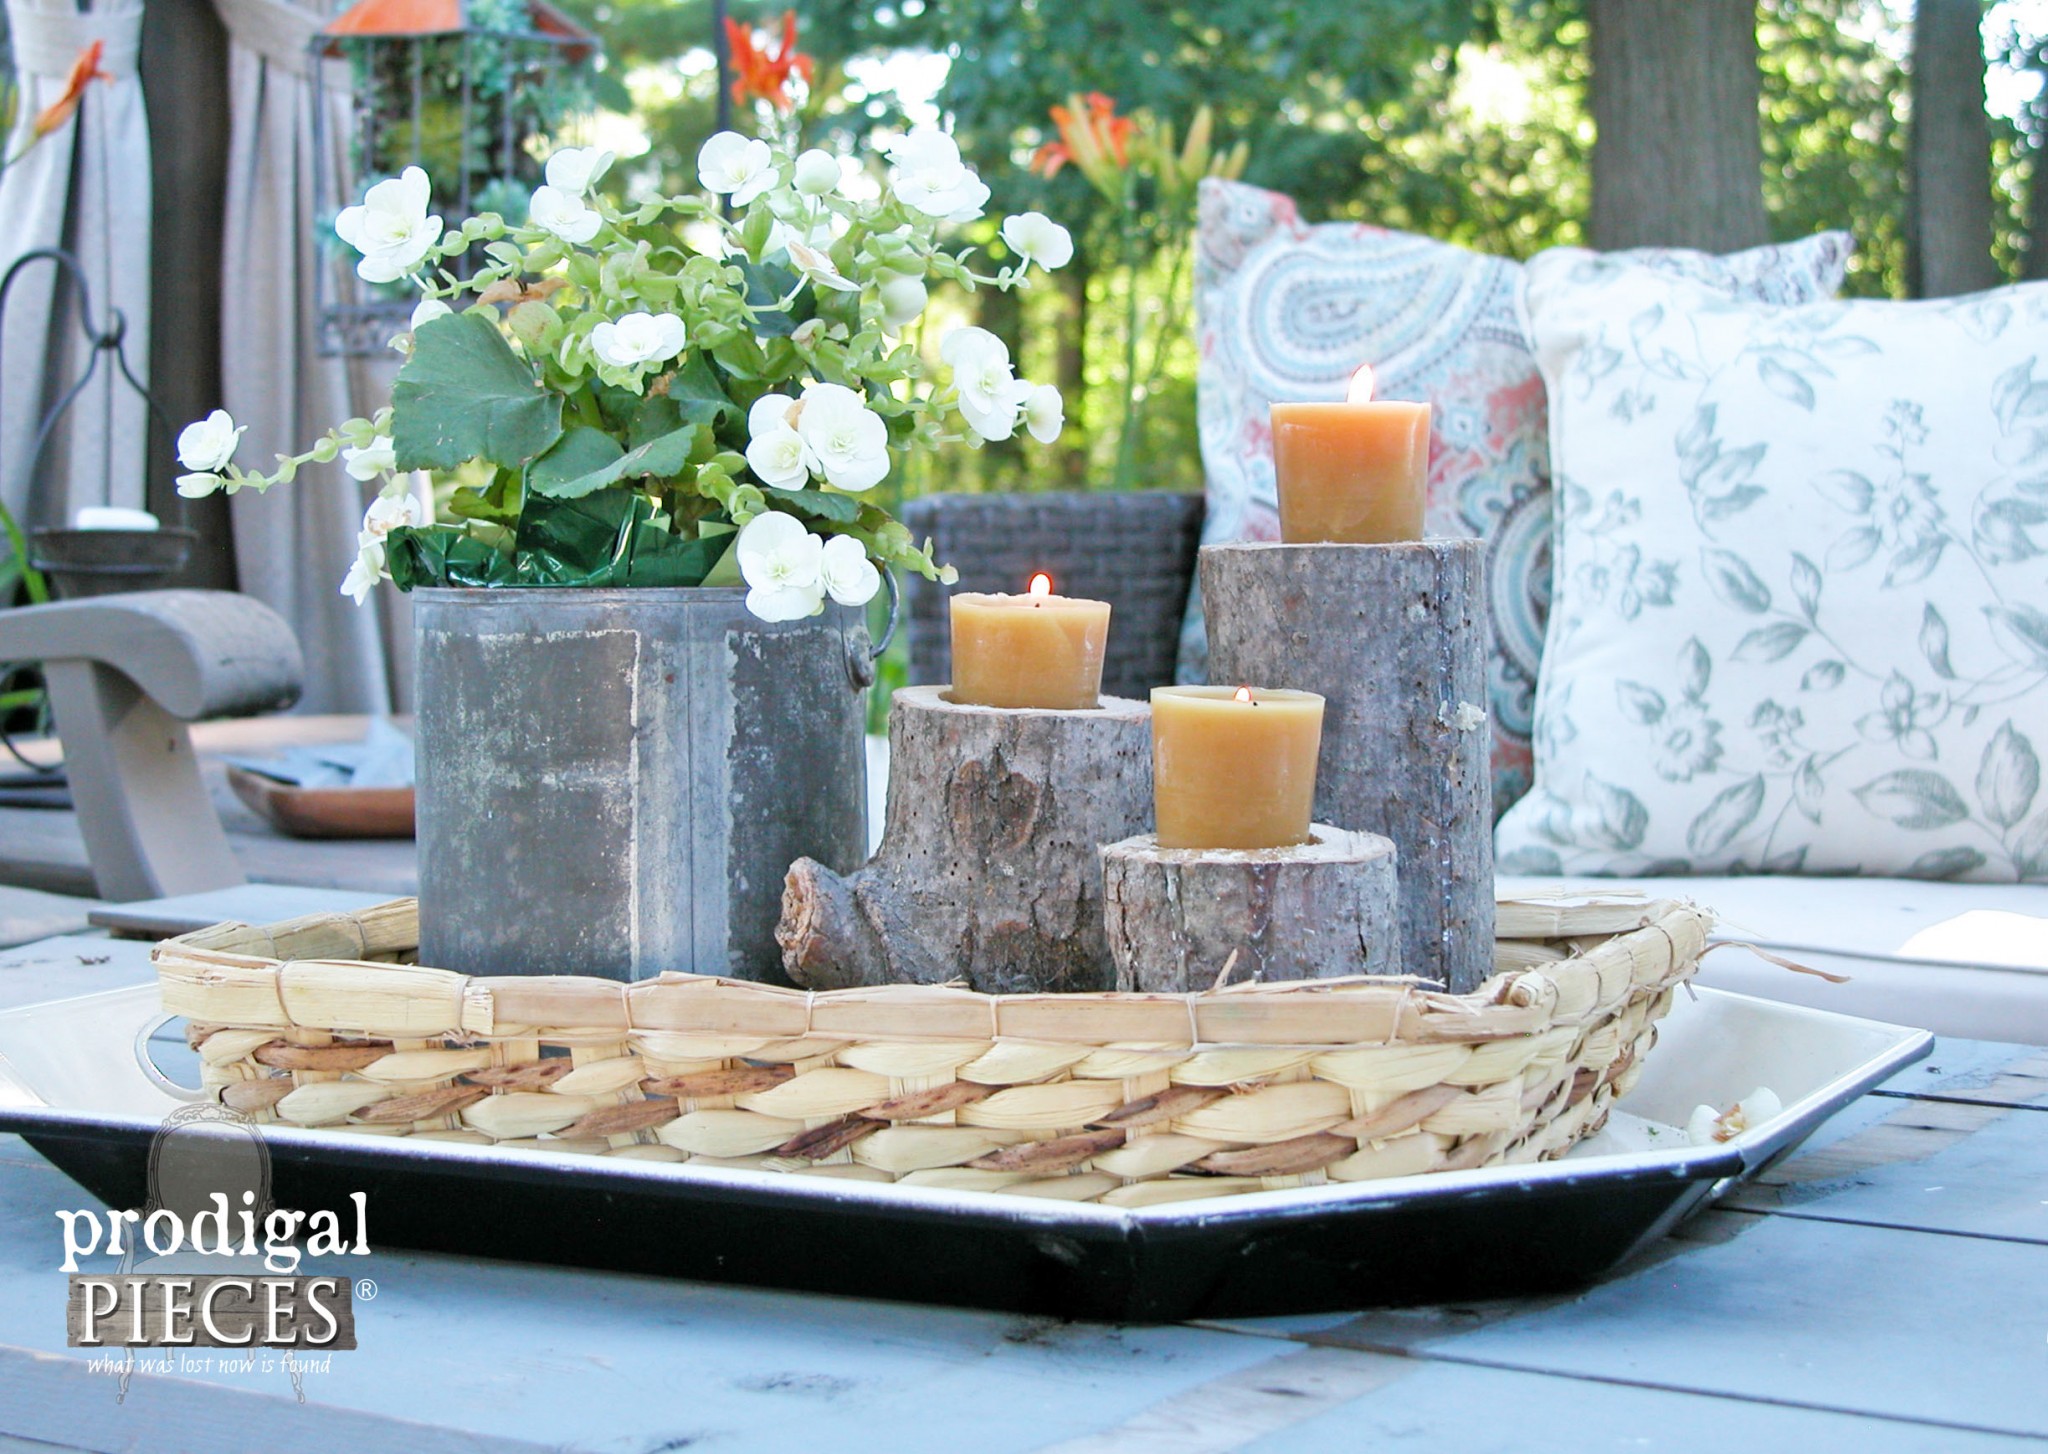 DIY Log Candlesticks on Outdoor Patio Table by Prodigal Pieces | www.prodigalpieces.com